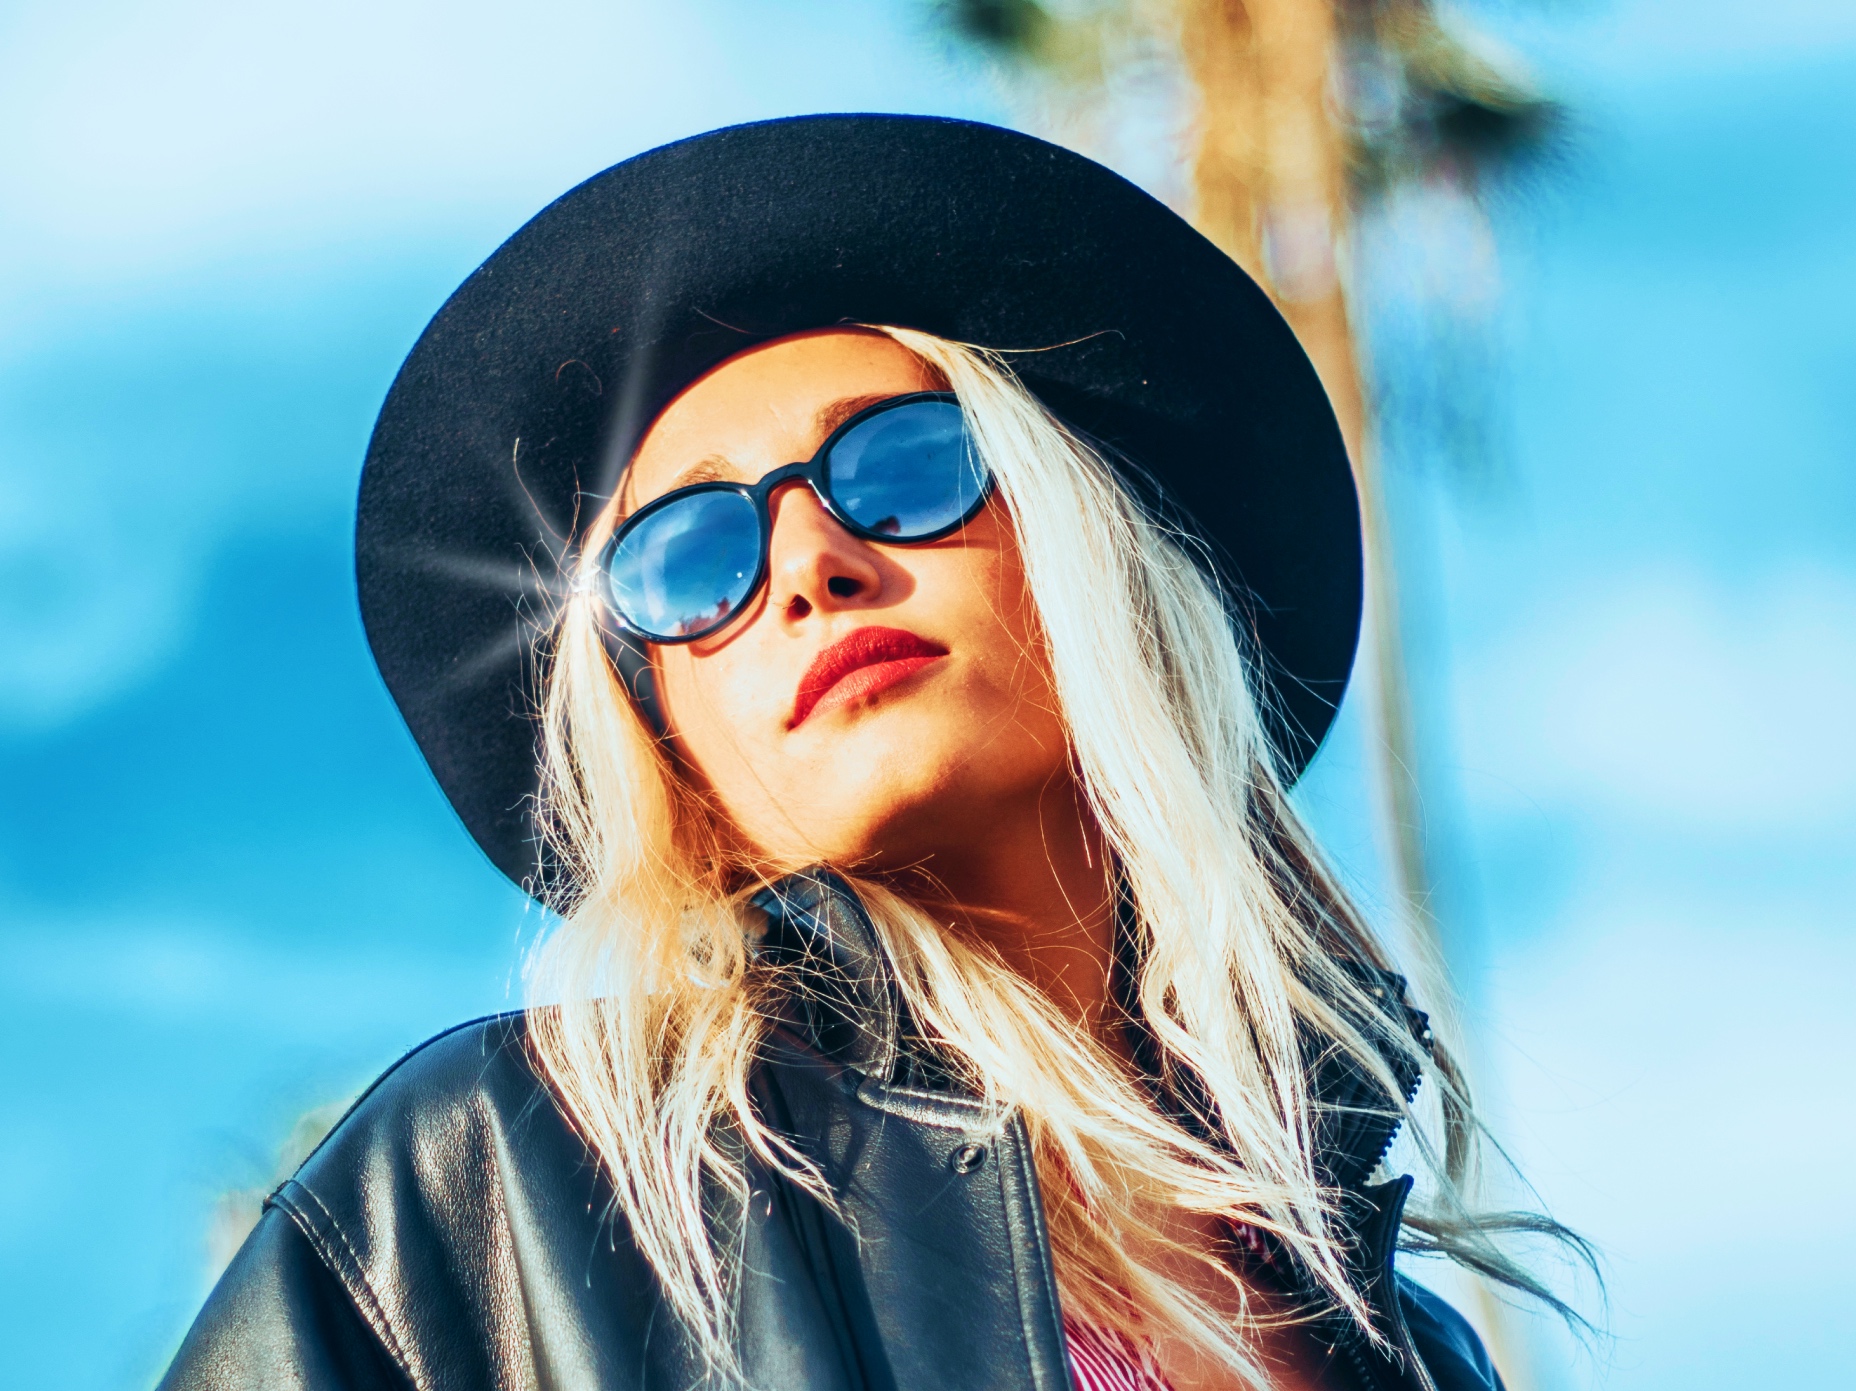 Blonde girl with sunglasses and a black hat